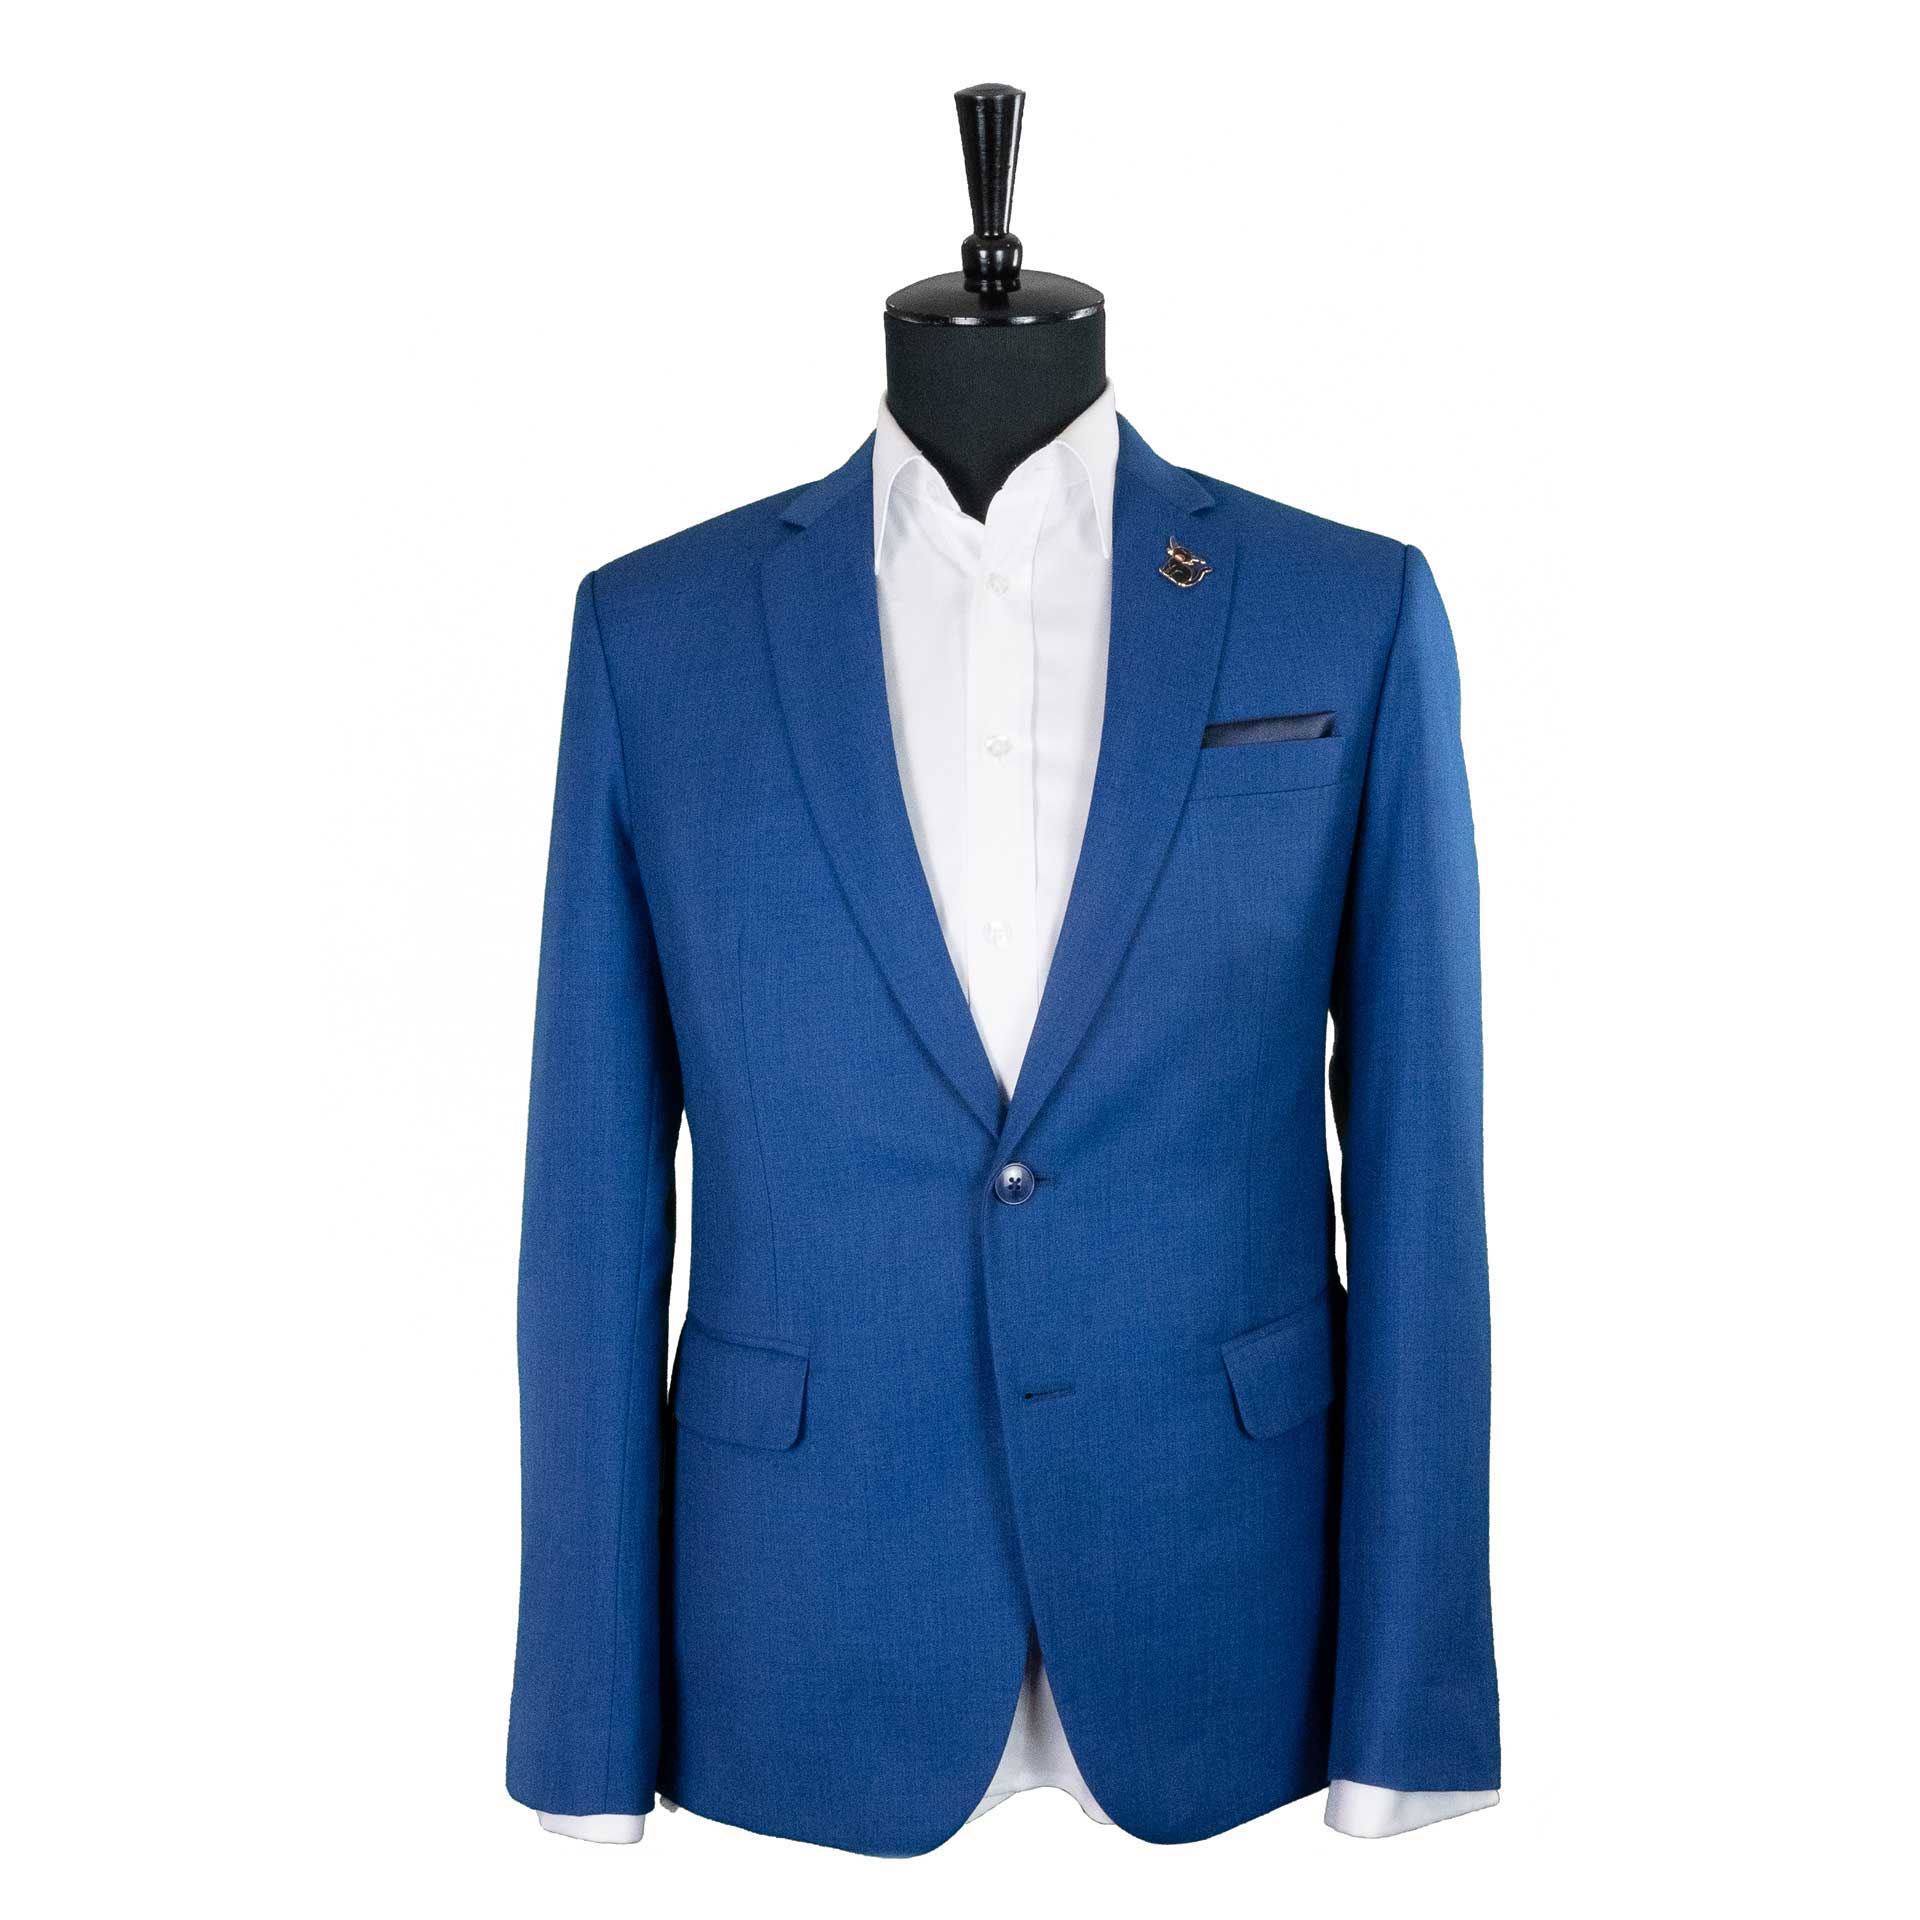 Geoffrey | Suitably - Australian Tailor-Made Suits